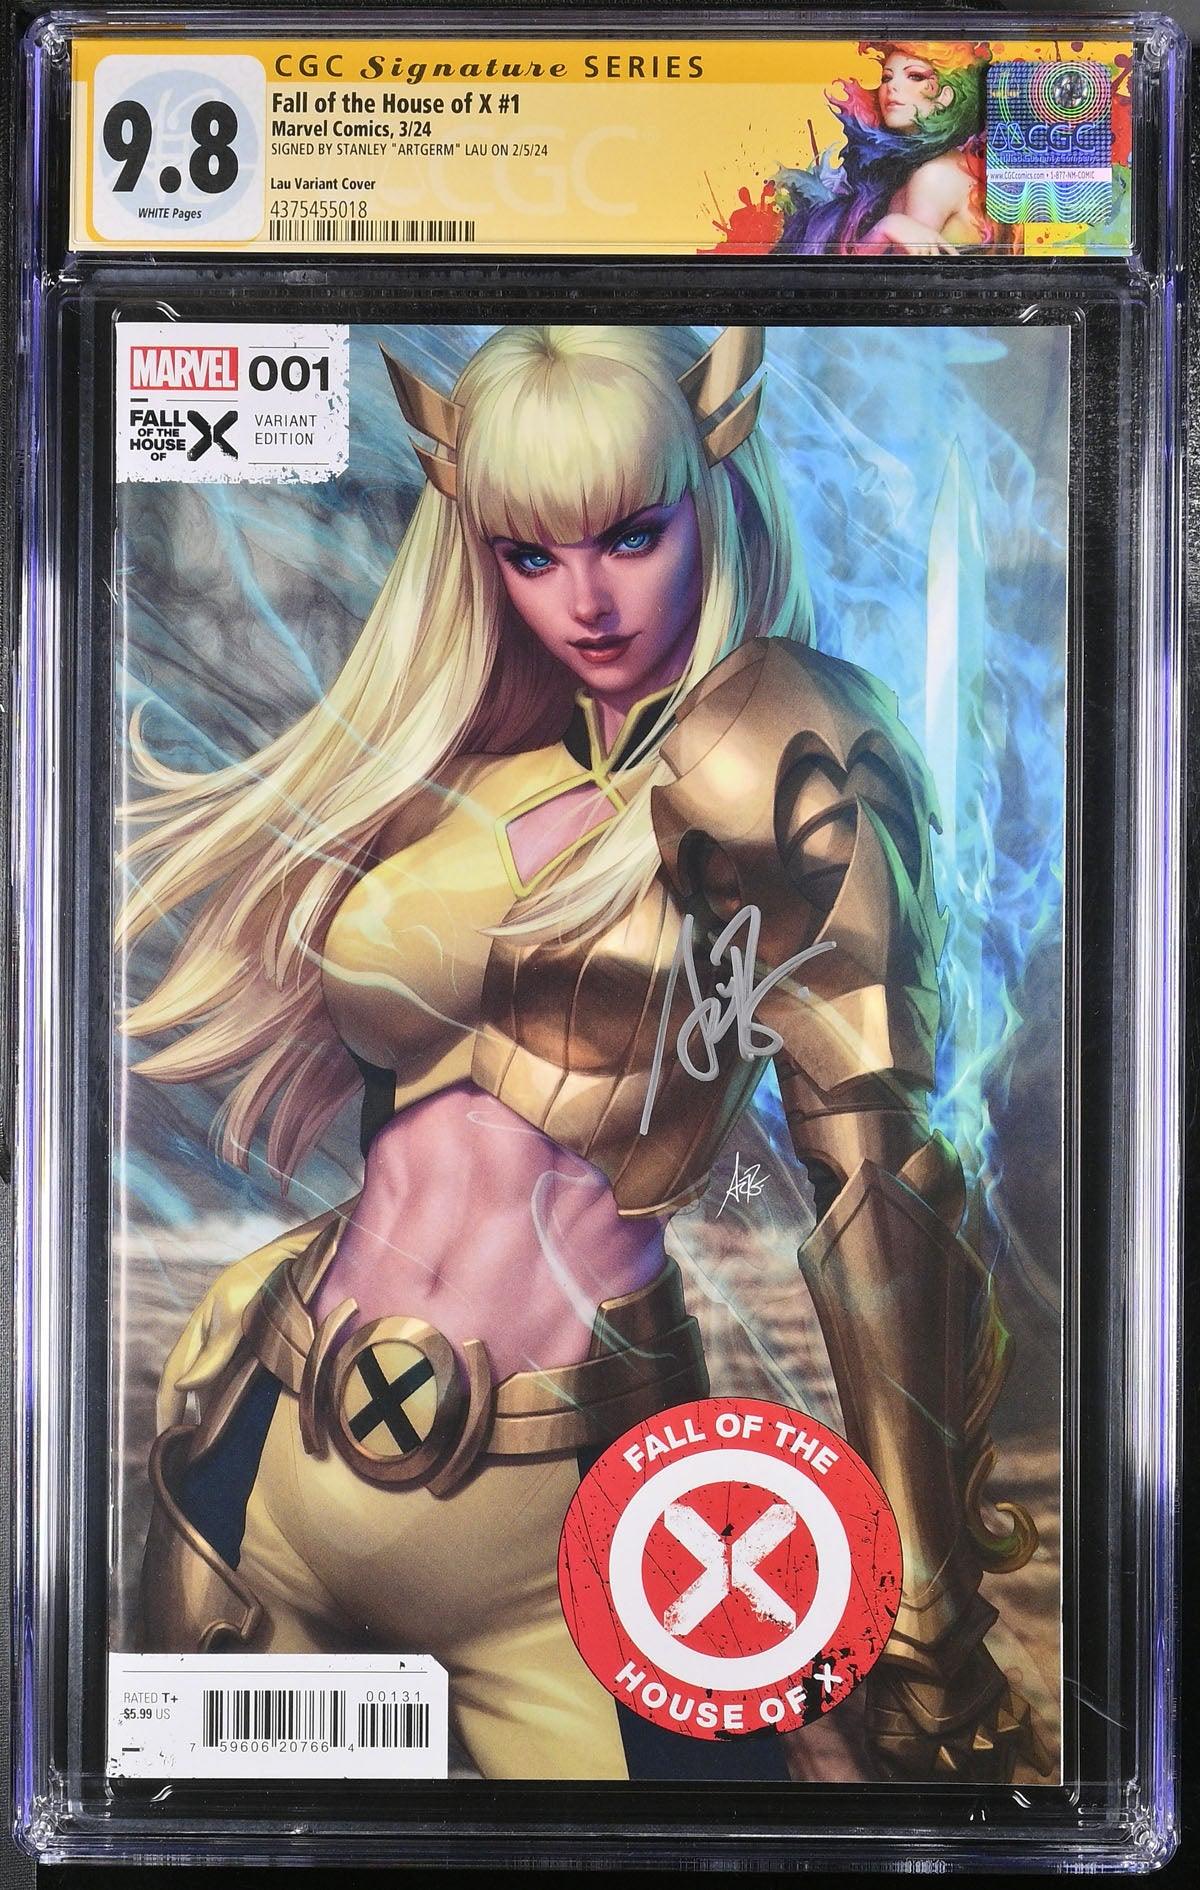 CGC FALL OF THE HOUSE OF X #1 LAU VARIANT (9.8) SIGNATURE SERIES - SIGNED BY STANLEY "ARTGERM"